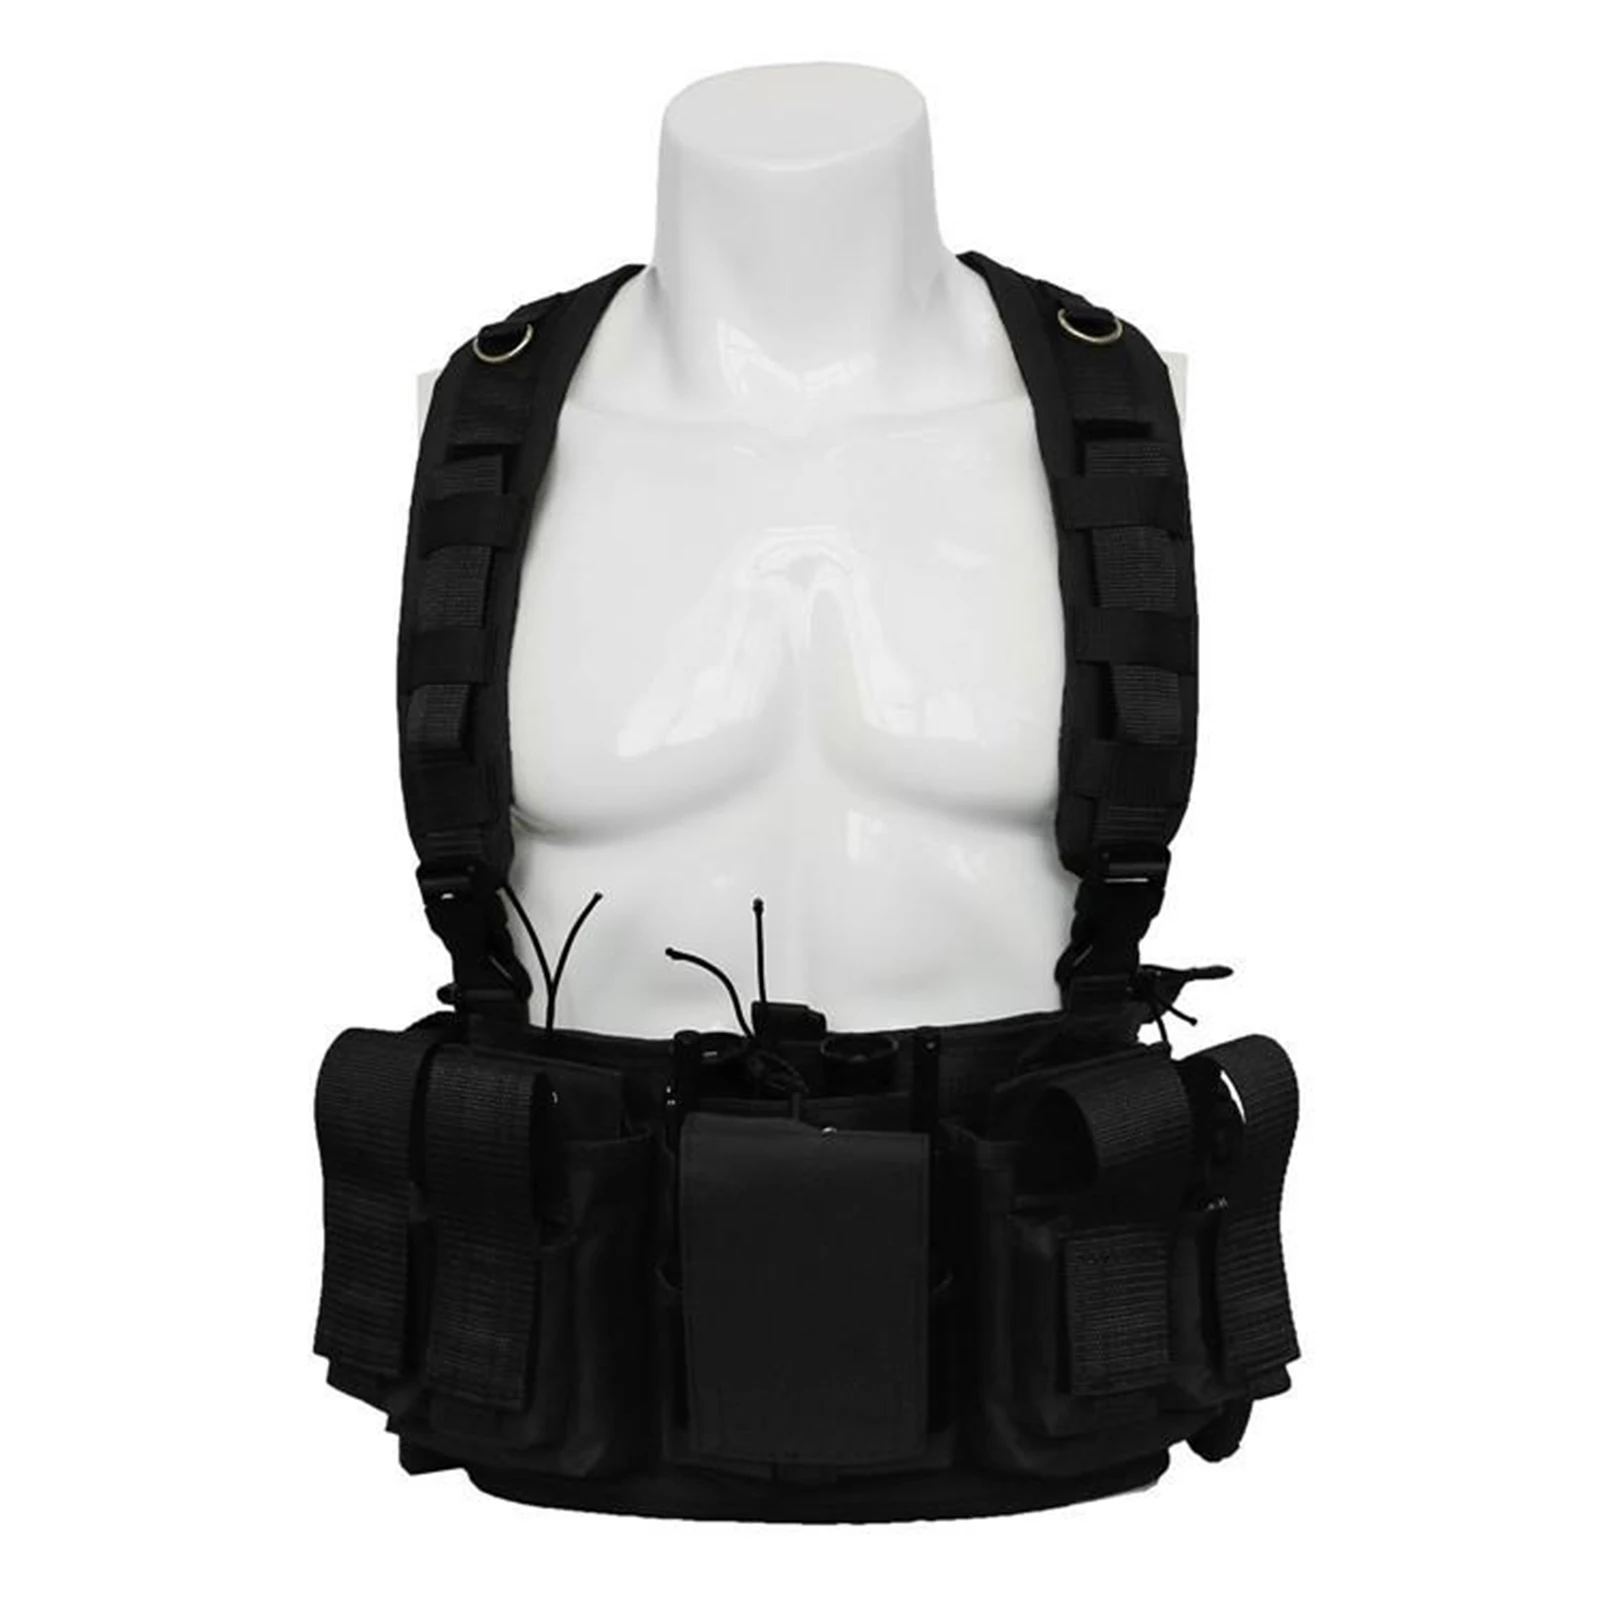 Adjustable Chest Rig  Hunting Tactical Vest  Molle Pouch Bag